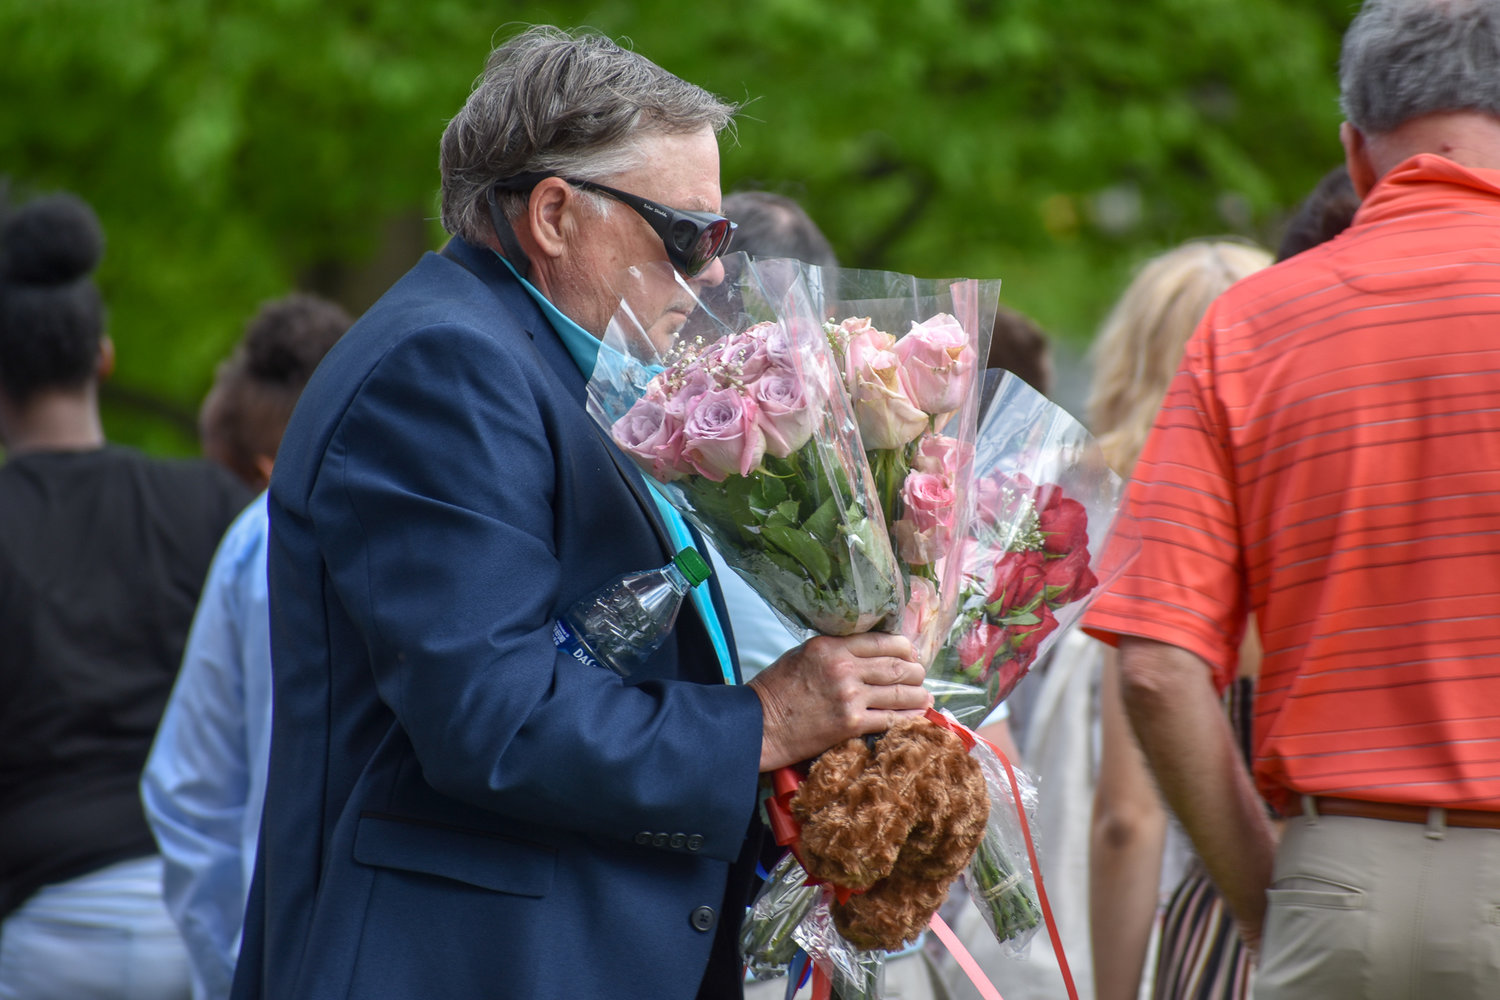 A graduation guest finds his seat with celebratory flowers in tow.